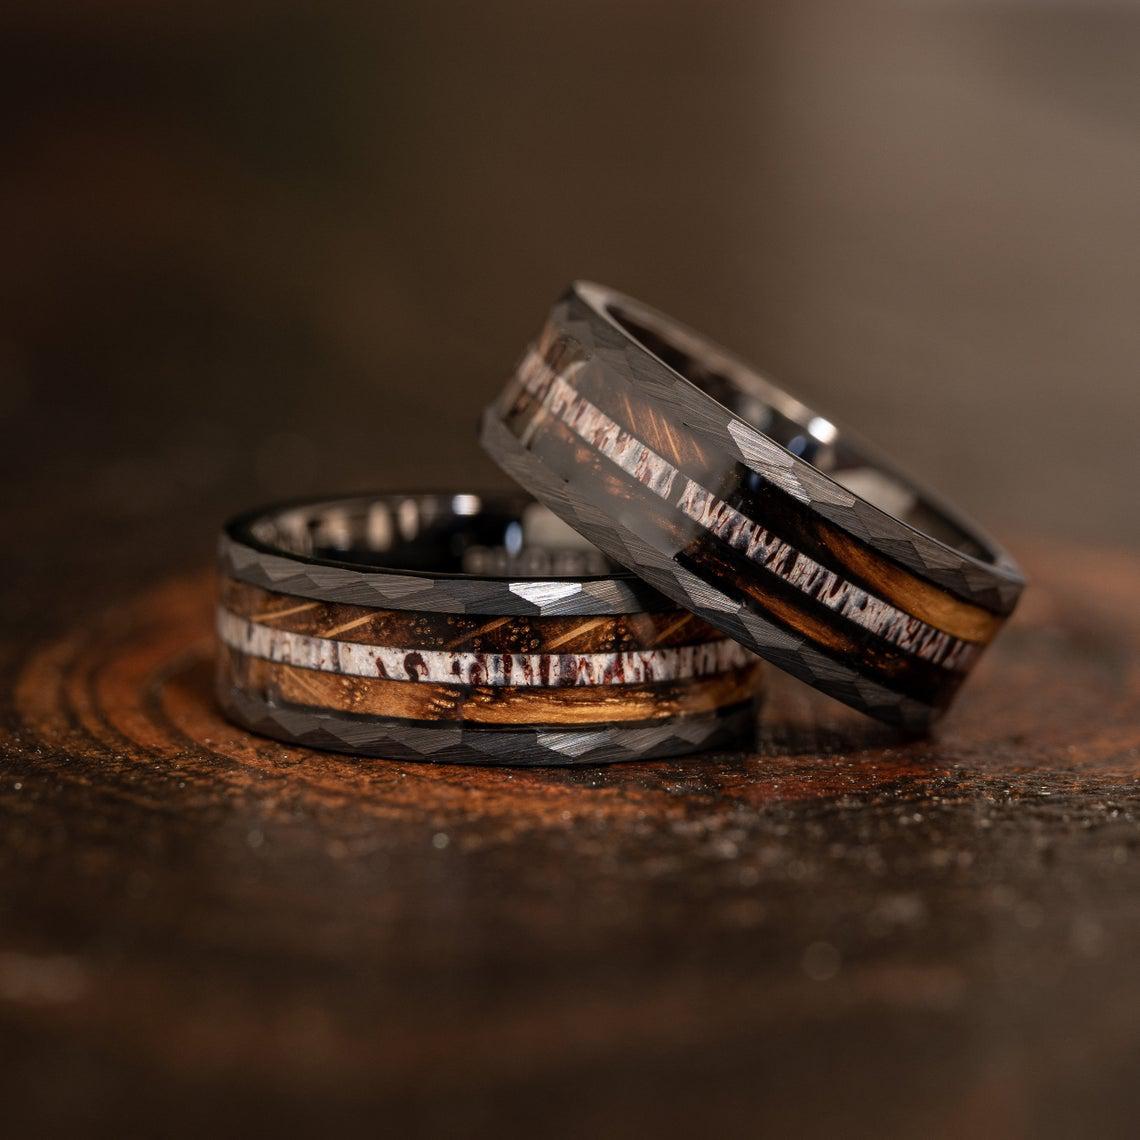 "Zeus" Hammered Ring- Black with Charred Whiskey Barrel and Antler - 6mm/8mm